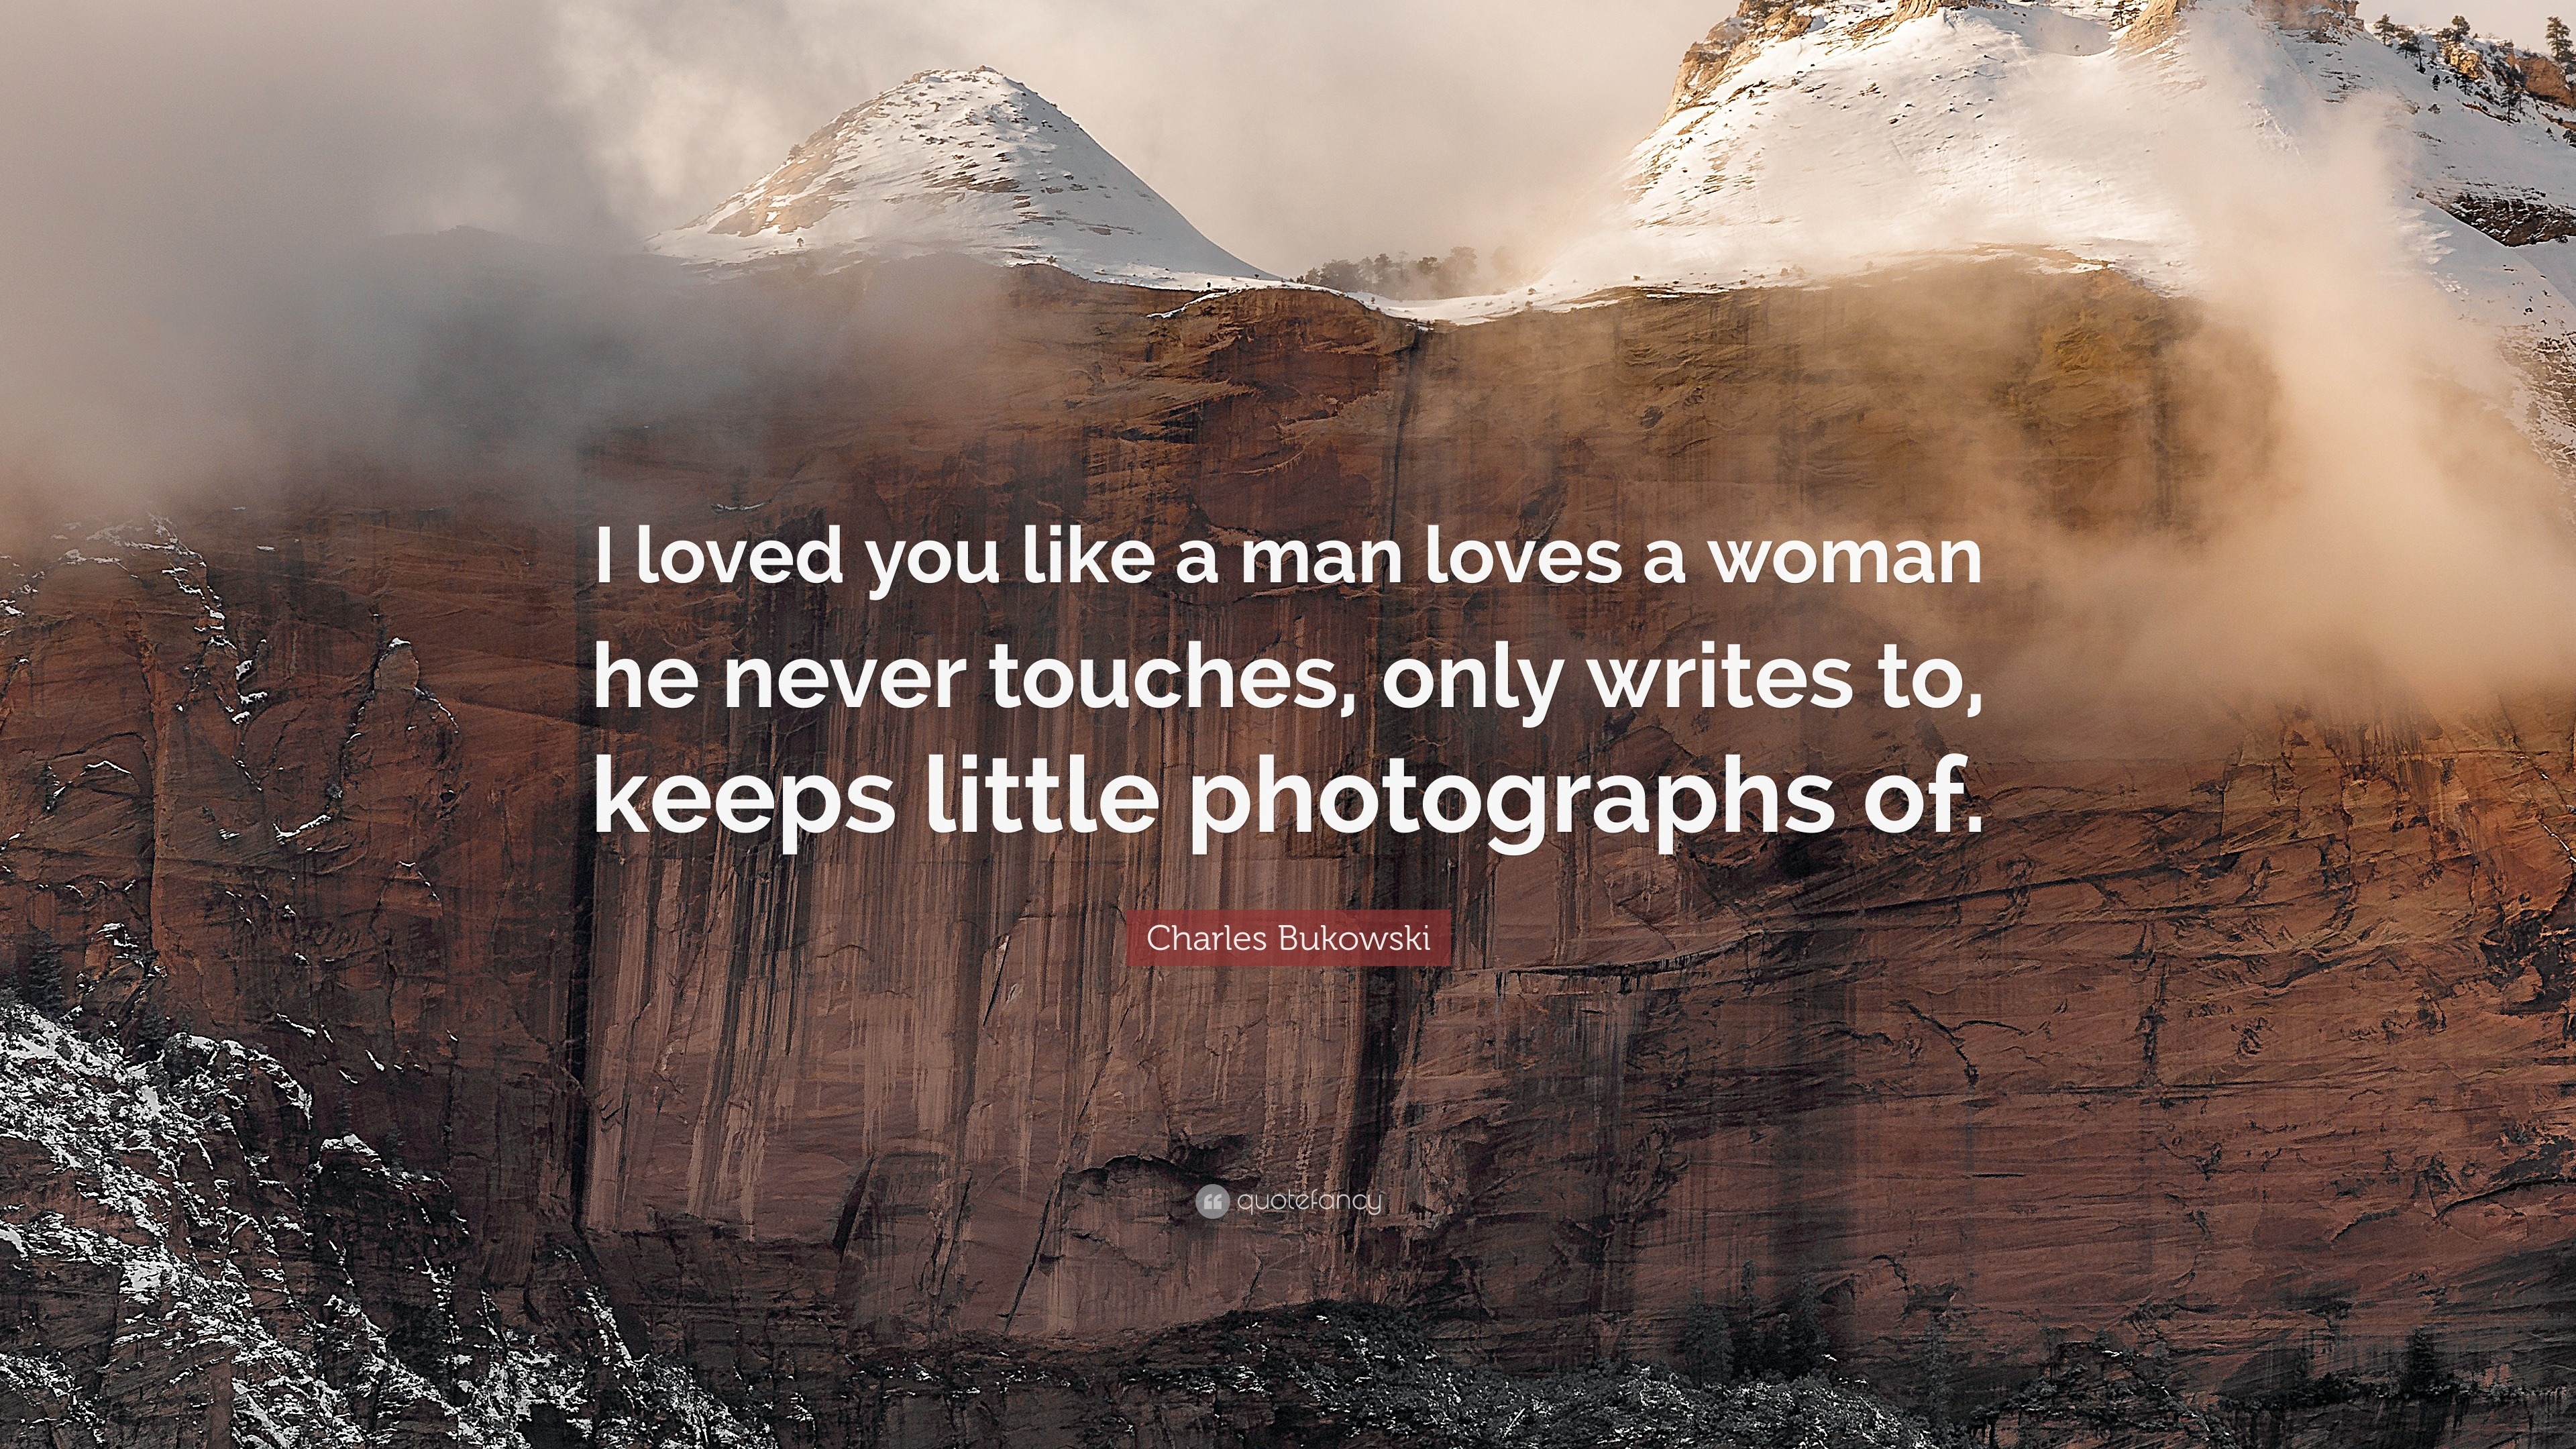 Charles Bukowski Quote “I loved you like a man loves a woman he never